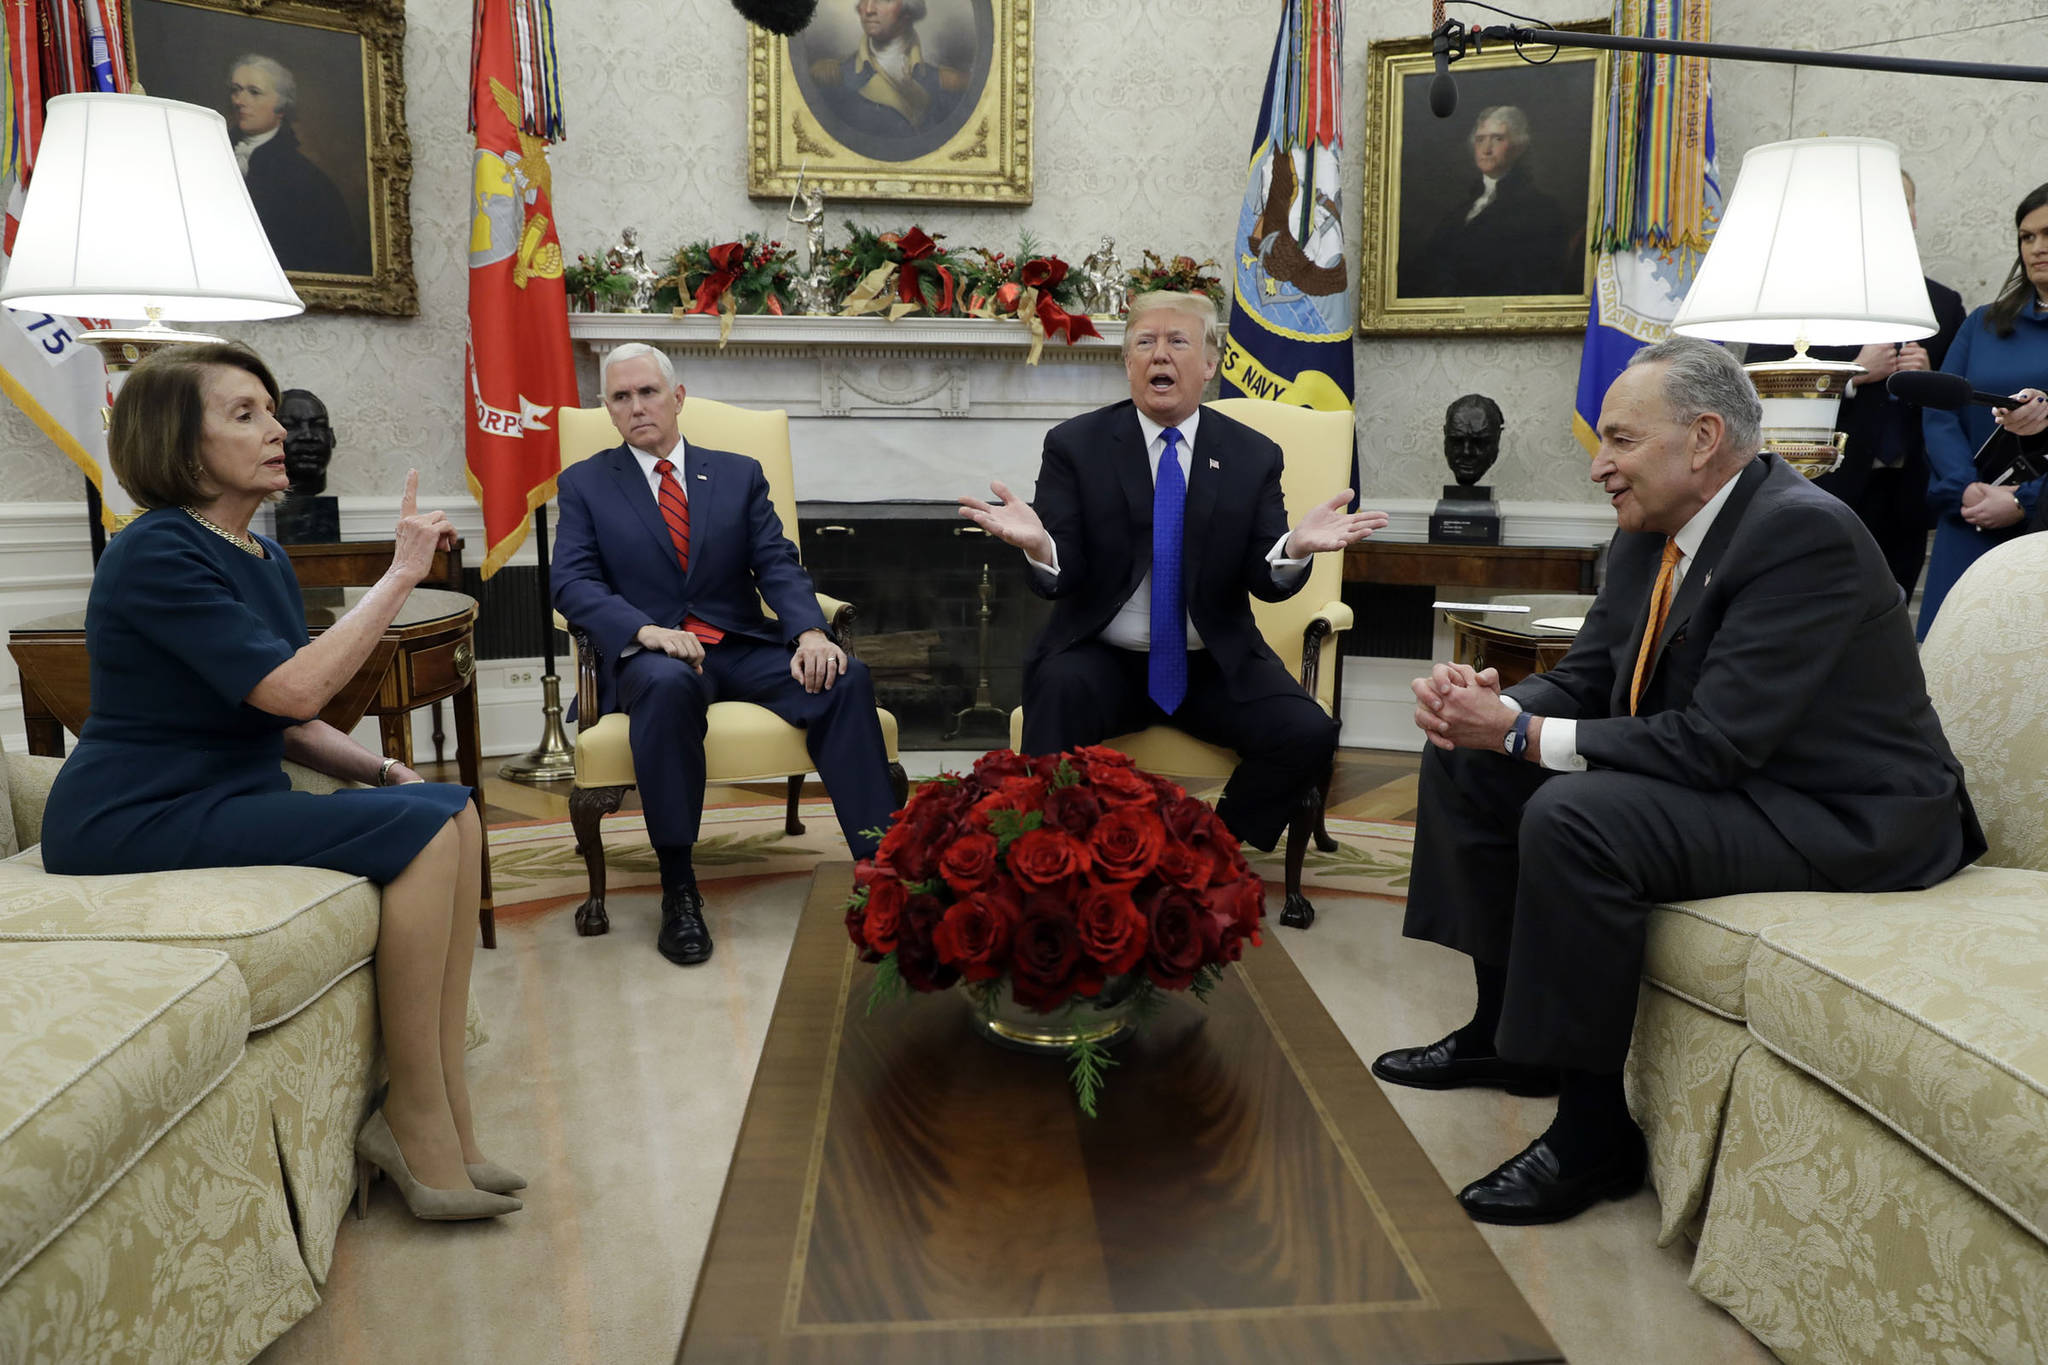 President Donald Trump and Vice President Mike Pence, second left, meet with Senate Minority Leader Chuck Schumer, D-N.Y., right, and House Minority Leader Nancy Pelosi, D-Calif., in the Oval Office of the White House on Tuesday, Dec. 11, 2018 in Washington, D.C. (Evan Vucci | Associated Press File)